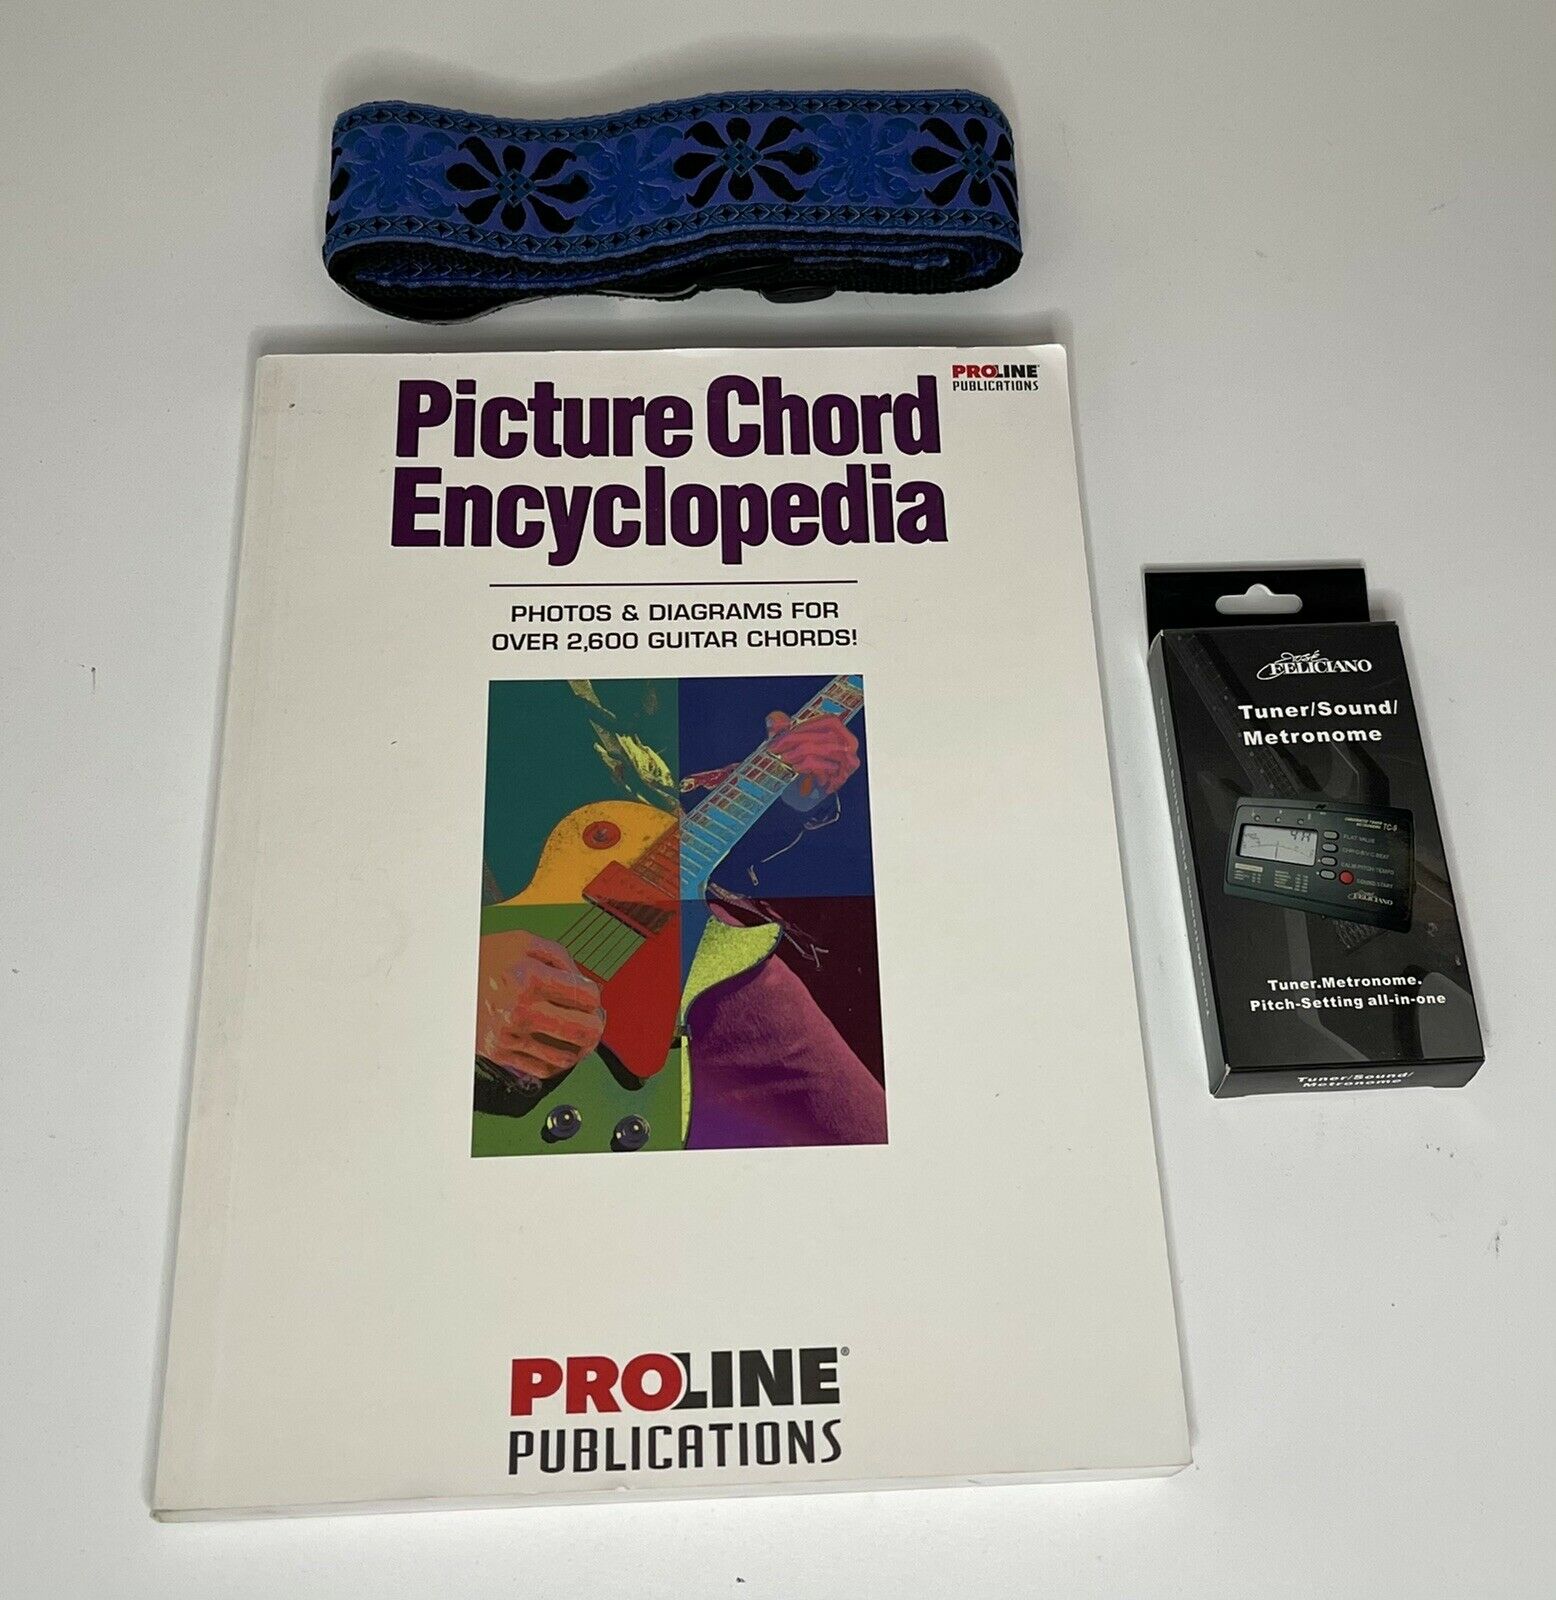 Metronome Sound Tuner New Jose Feliciano Guitar Strap Picture Chord Encyclopedia